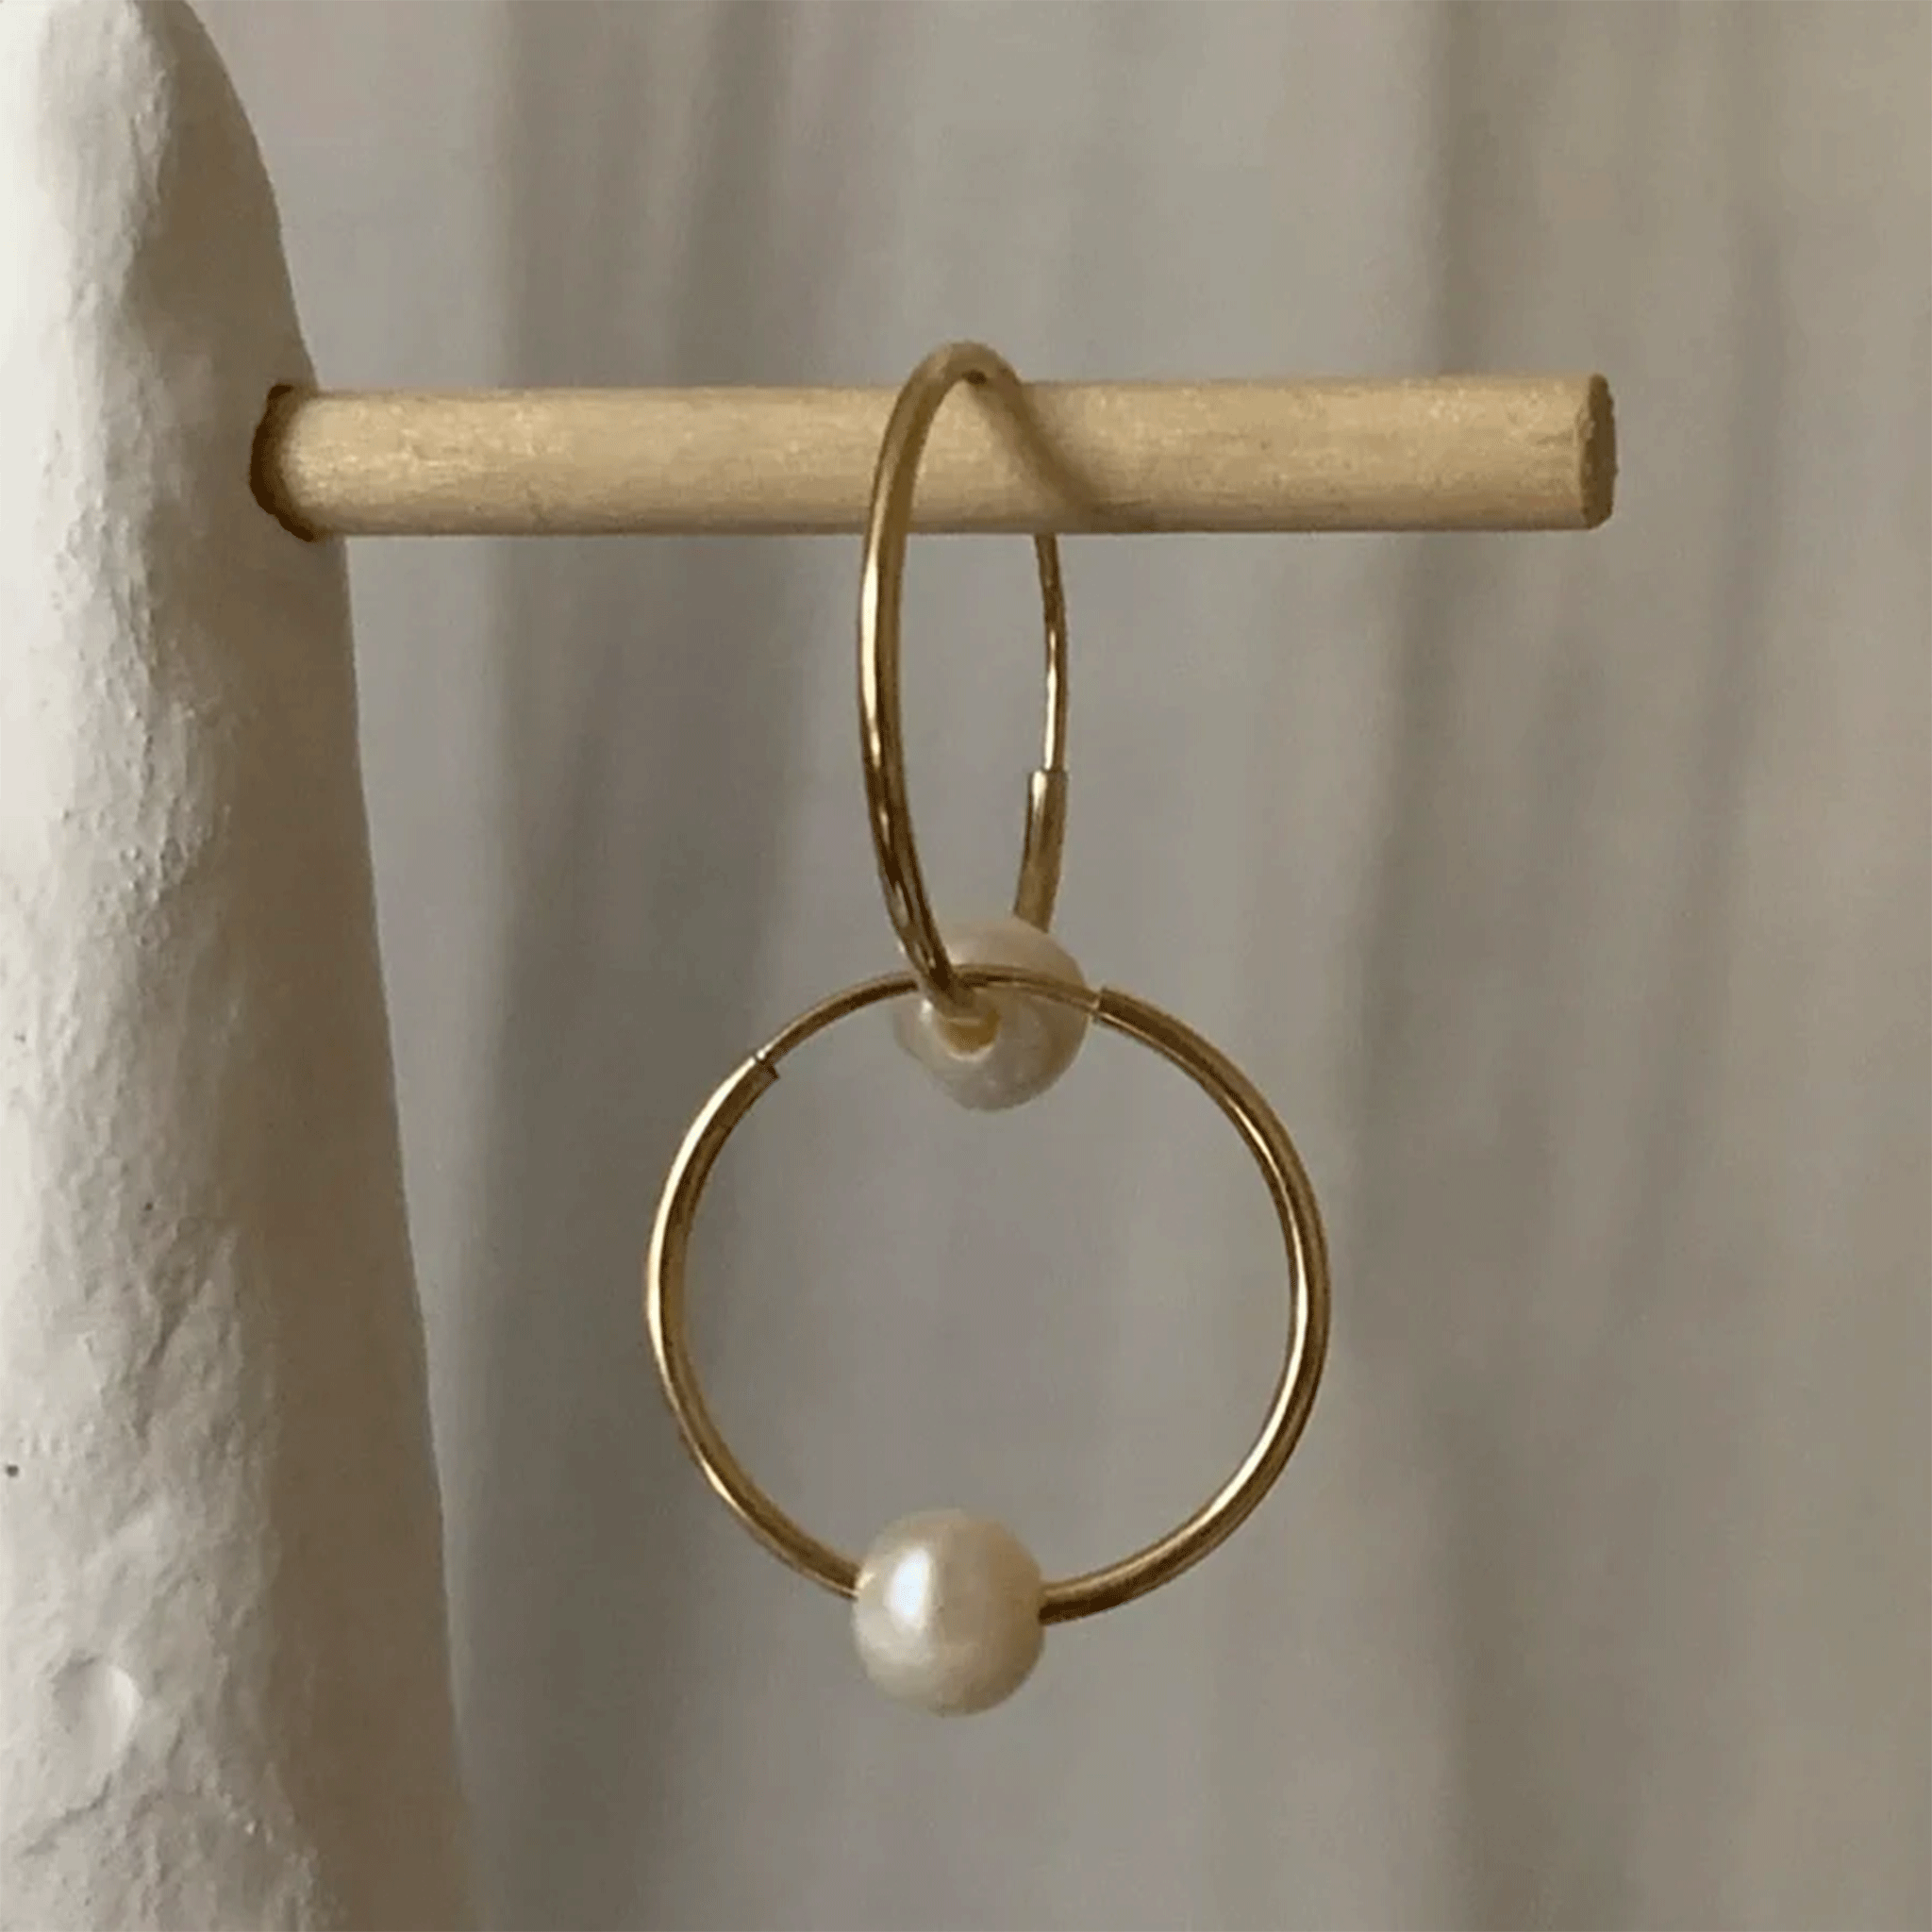 On a tan background is a pair of gold hoop earrings with a pearl on the bottom of each hoop. 